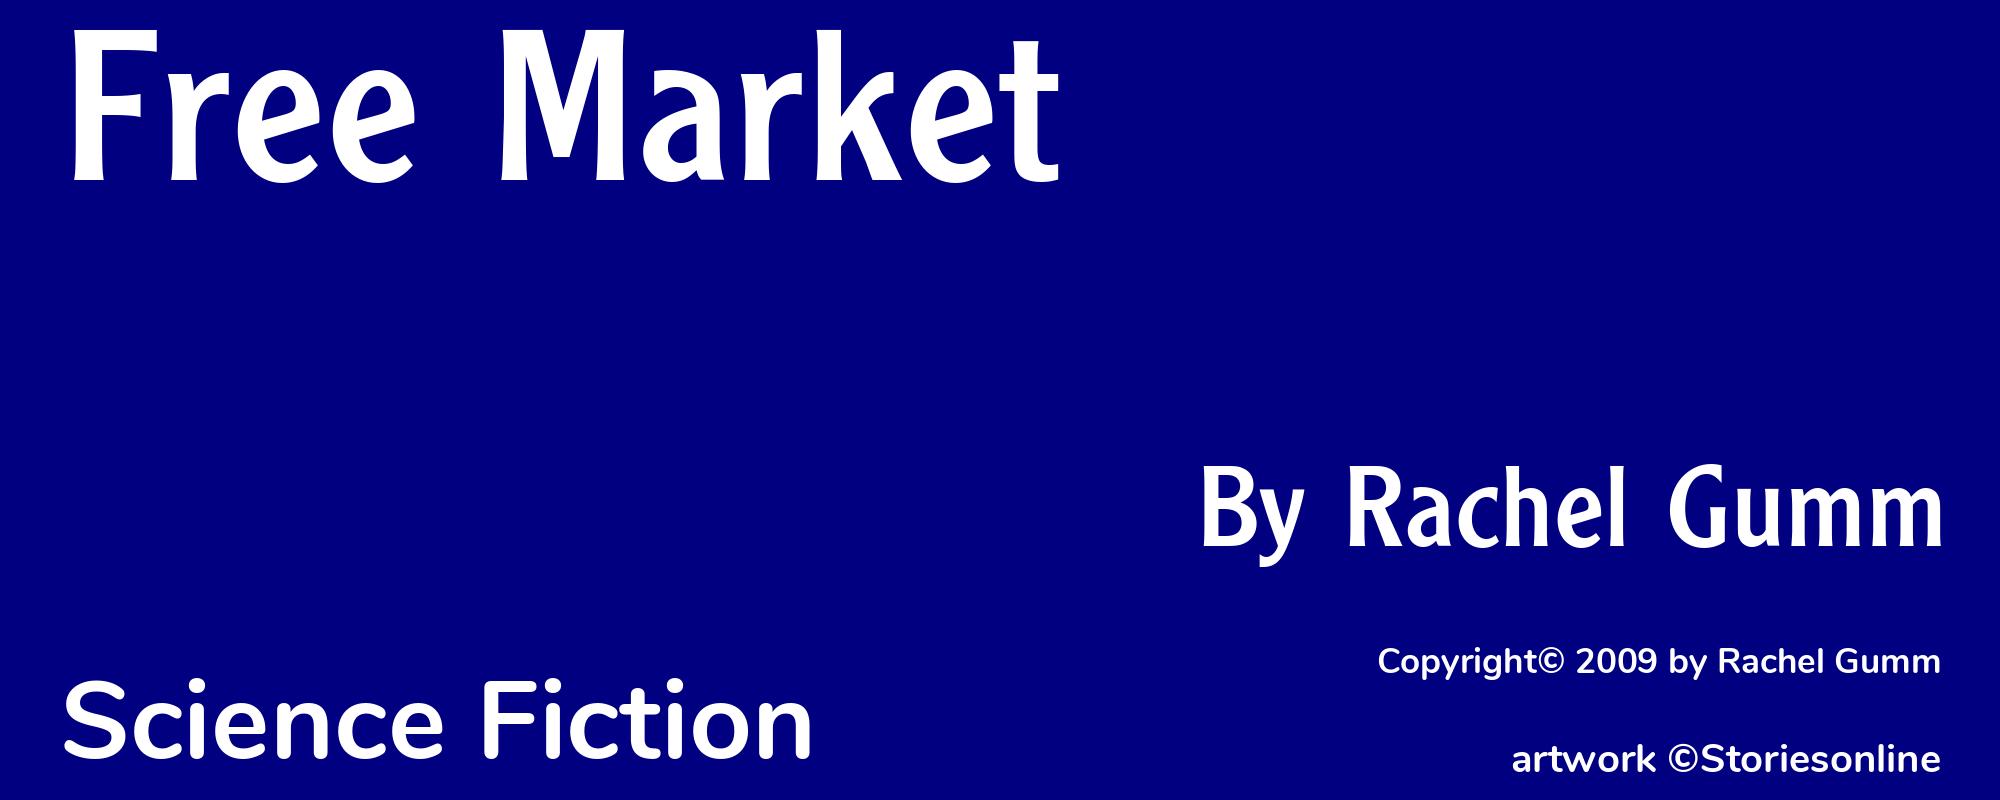 Free Market - Cover